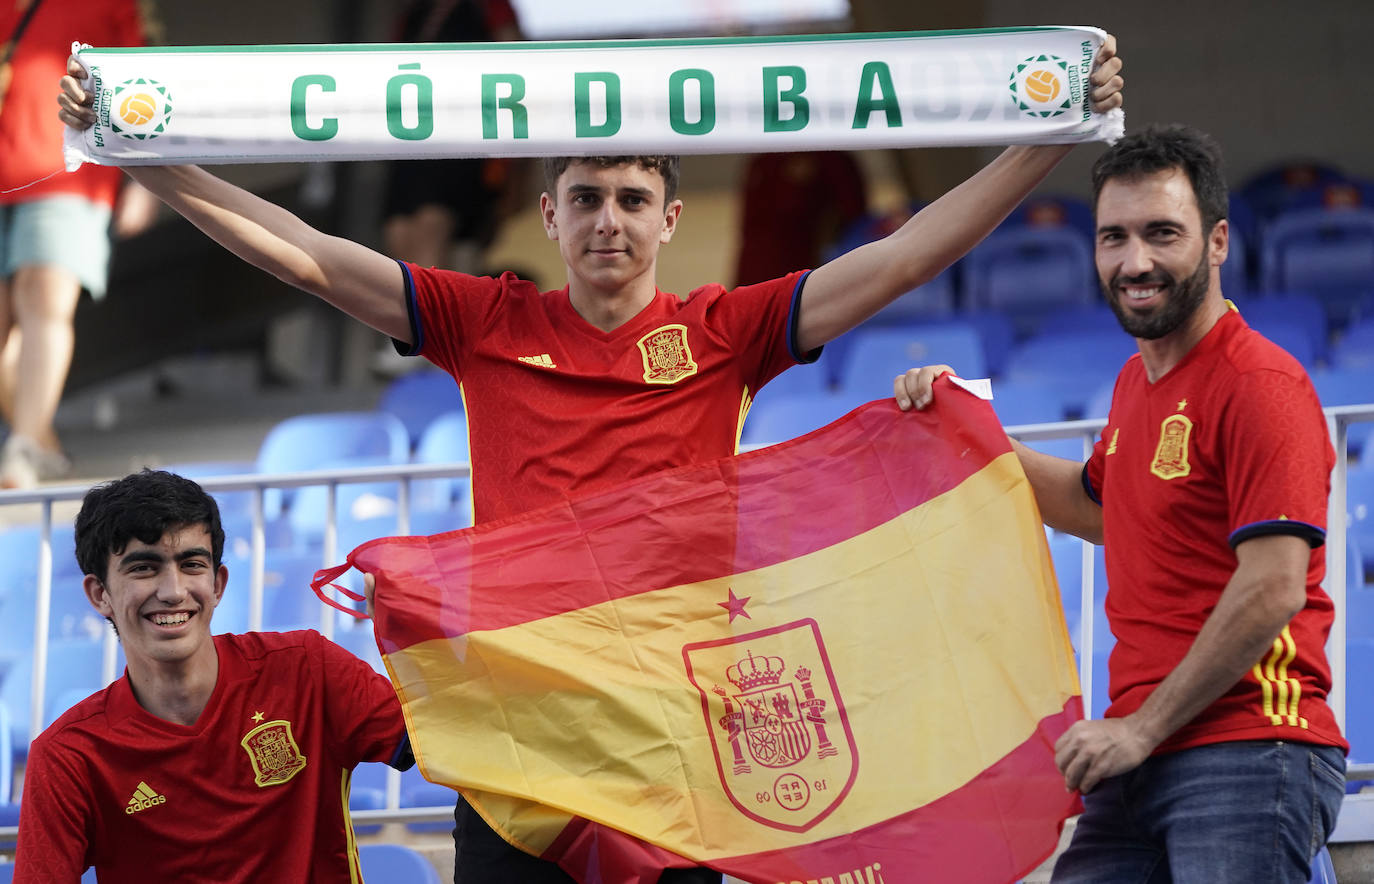 The atmosphere at La Rosaleda for the Spain game, in photos